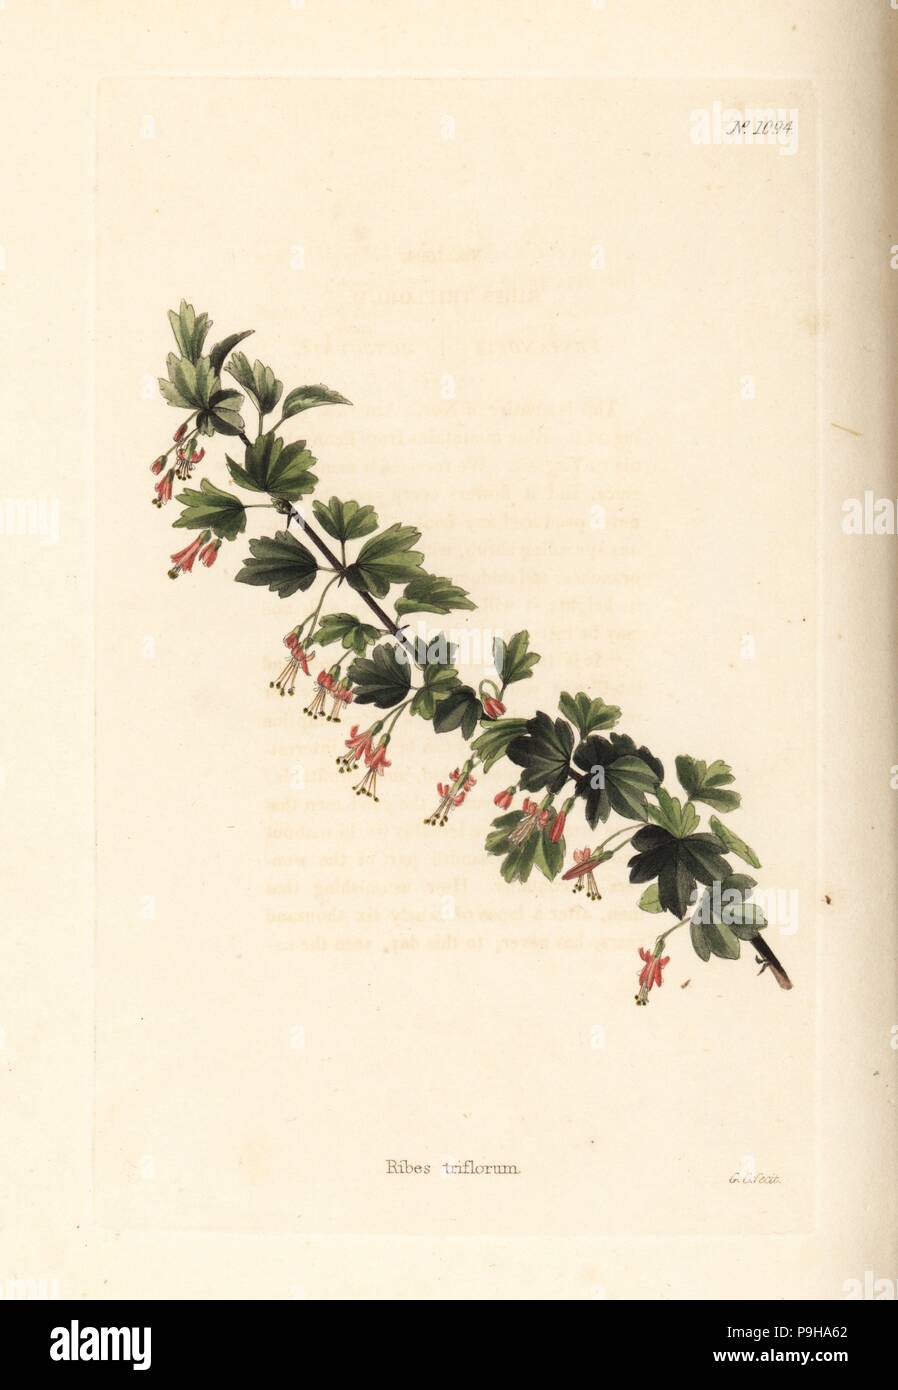 Ribes triflorum. Handcoloured copperplate engraving by George Cooke from Conrad Loddiges' Botanical Cabinet, Hackney, 1825. Stock Photo